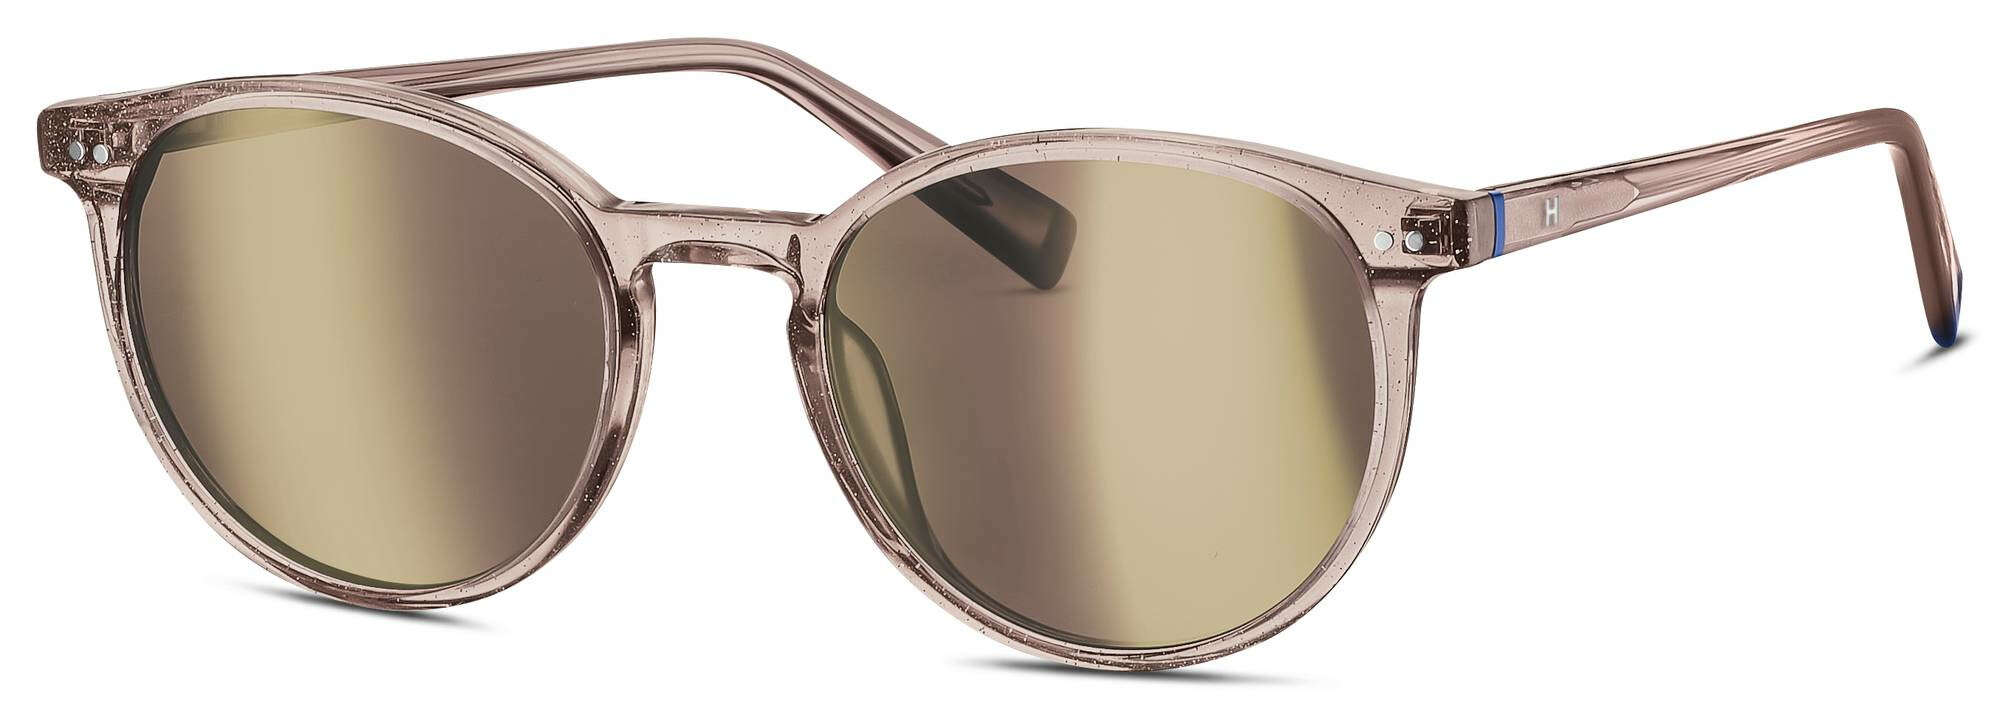 [products.image.front] HUMPHREY´S eyewear 584045 602360 Sonnenbrille